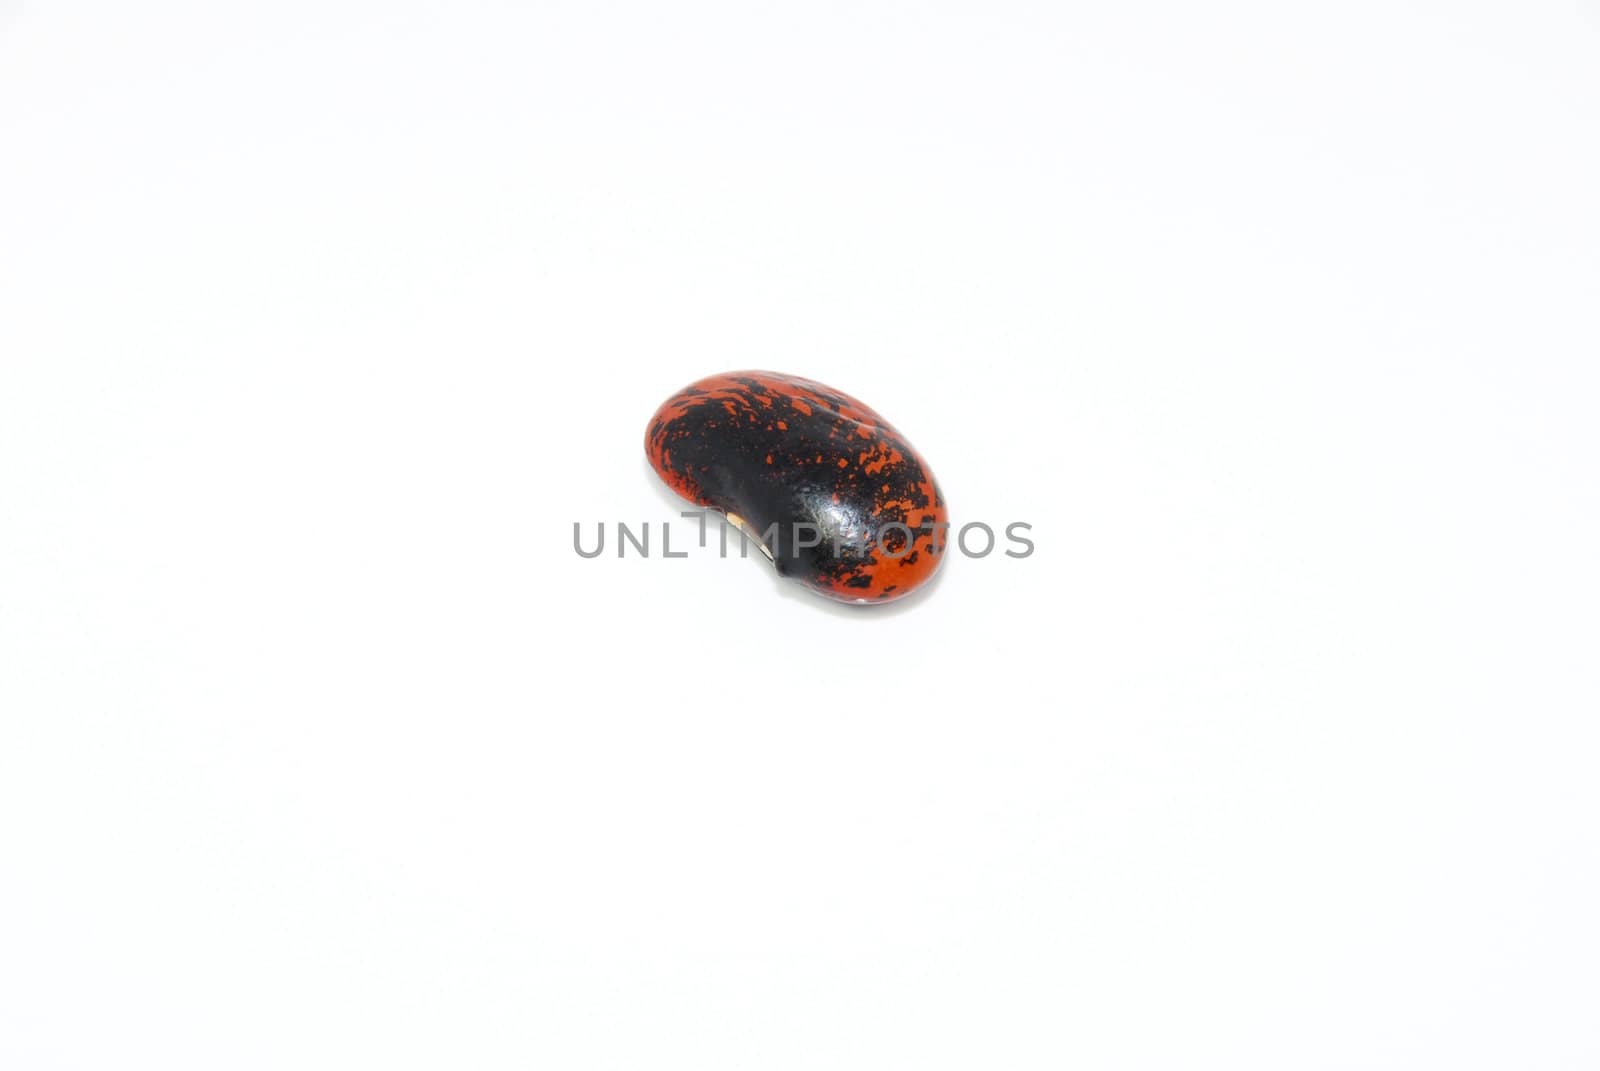 Single runner bean seed, isolated on a white background